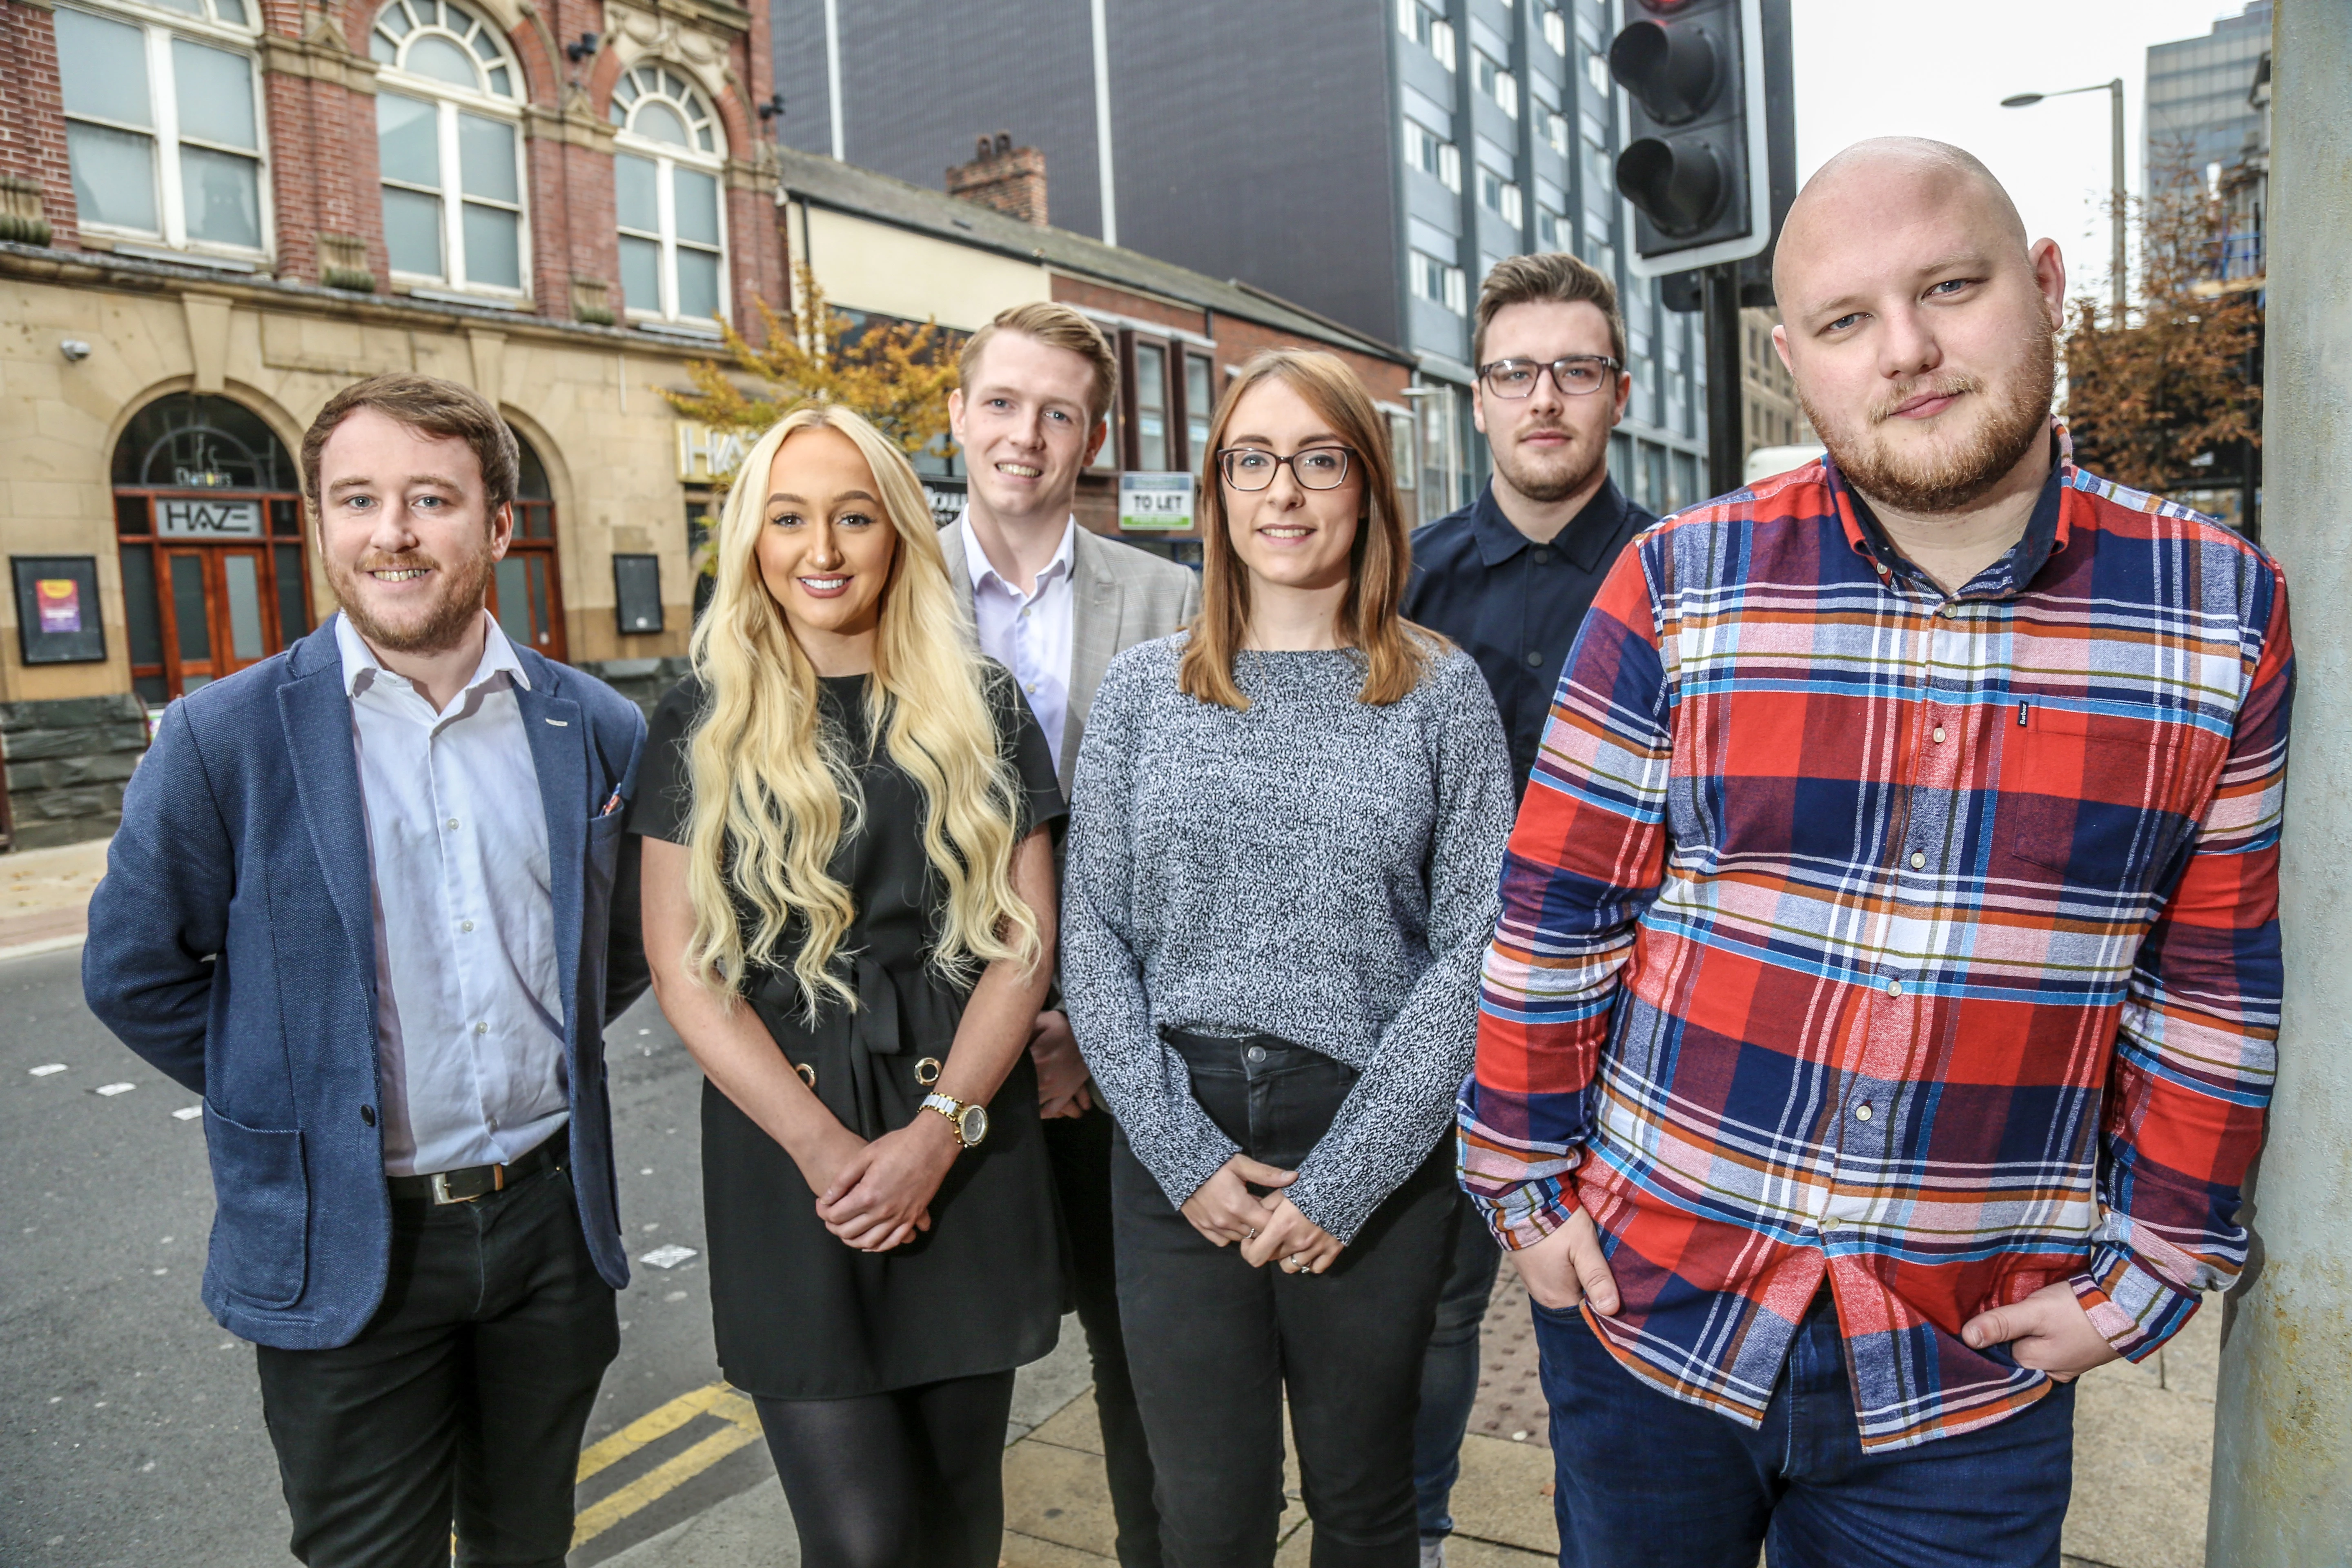 Mabo marketing director James Lees (right) with some of the company's new recruits